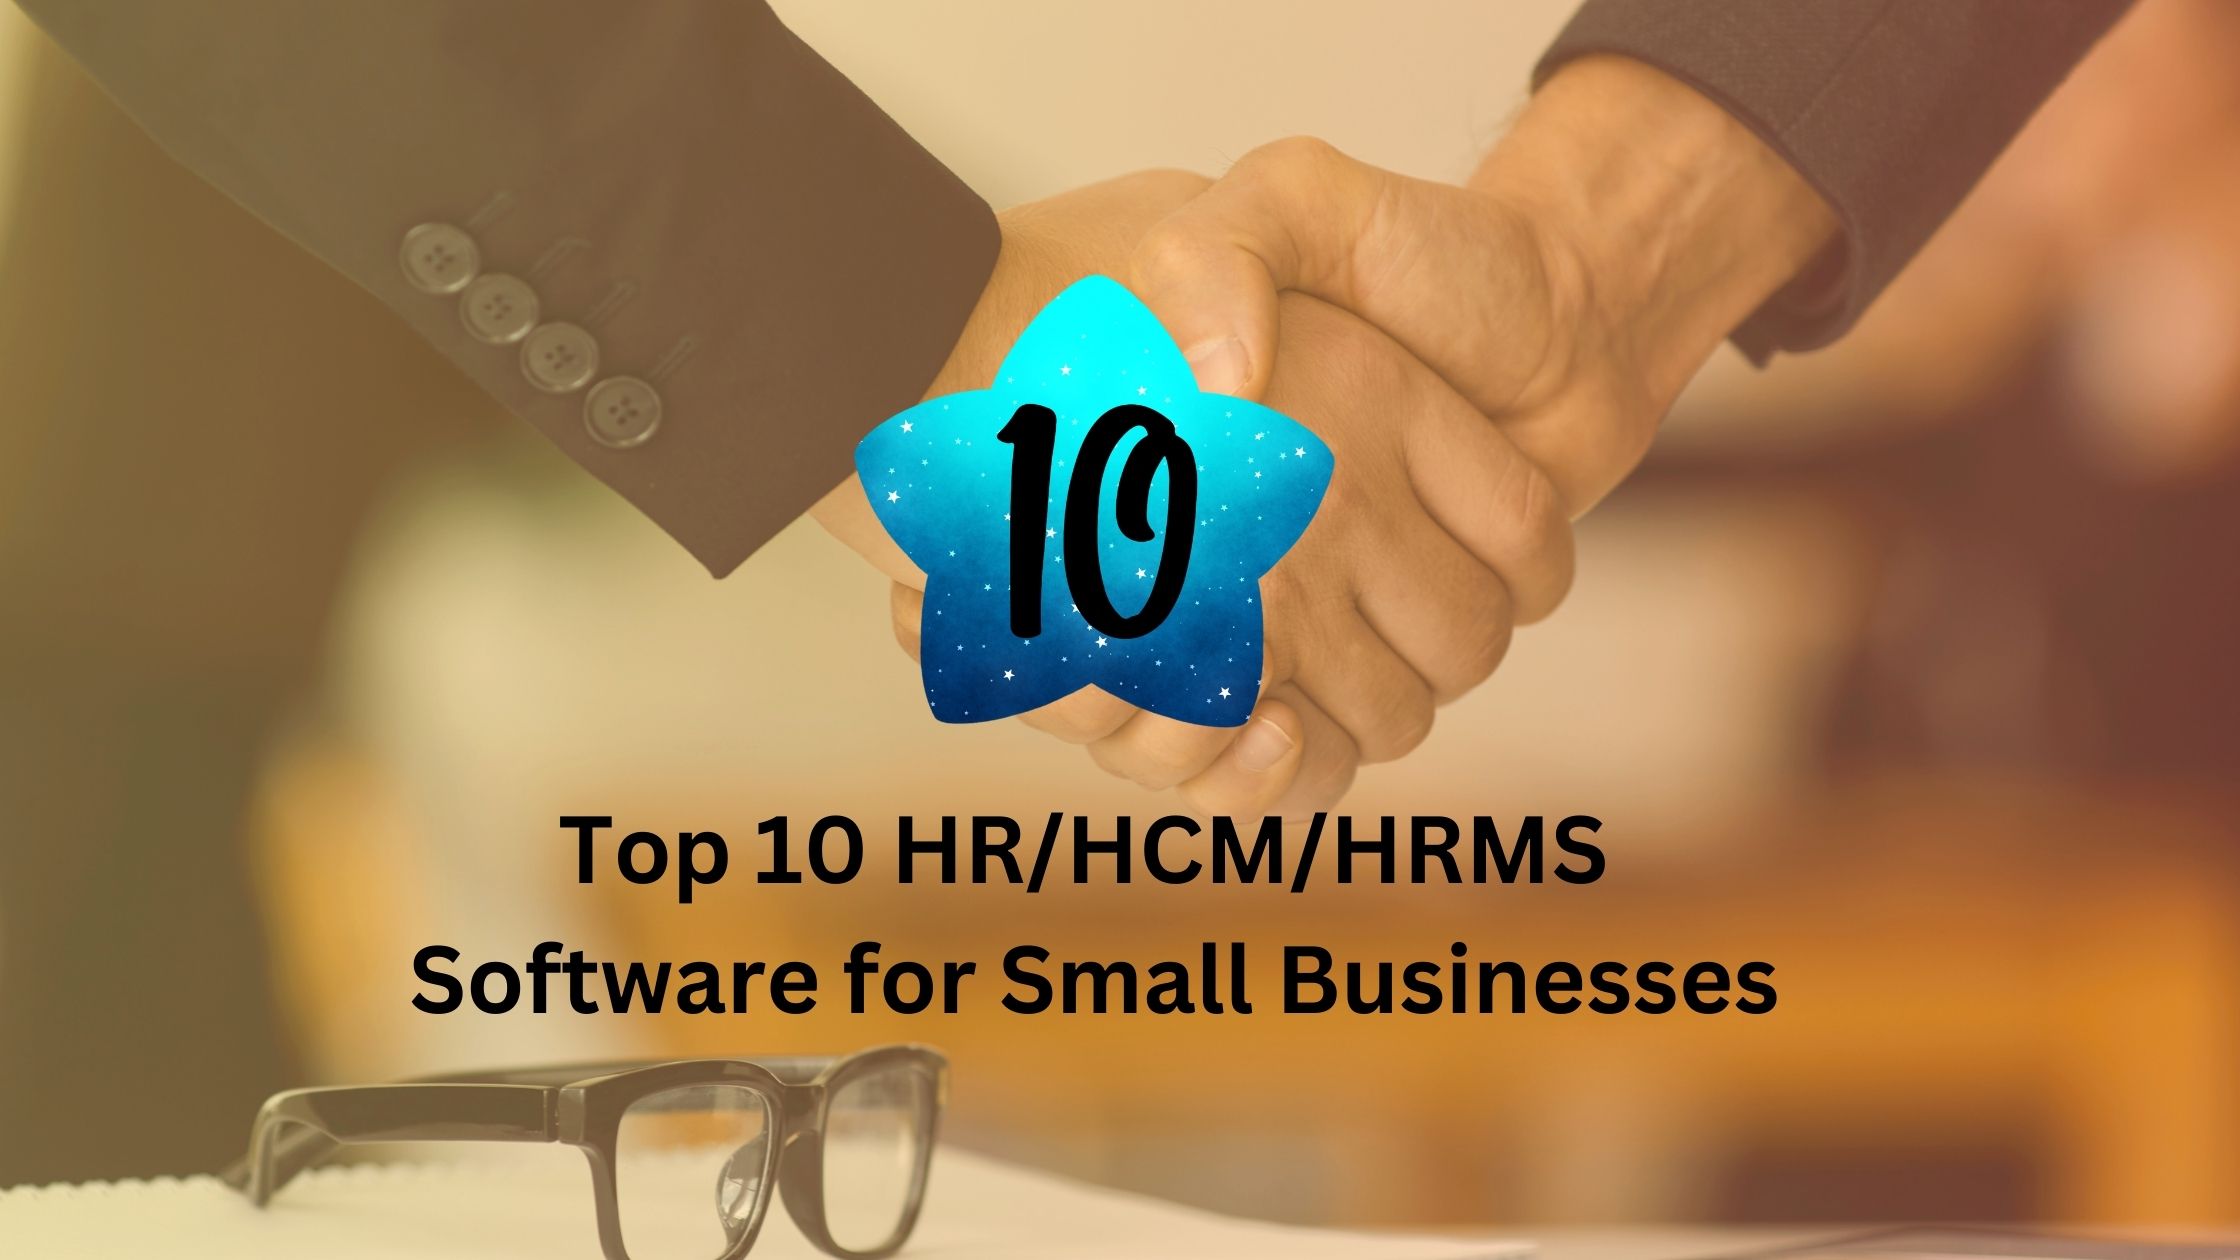 Top 10 HR/HCM/HRMS Software for Small Businesses: Streamline Your HR Operations